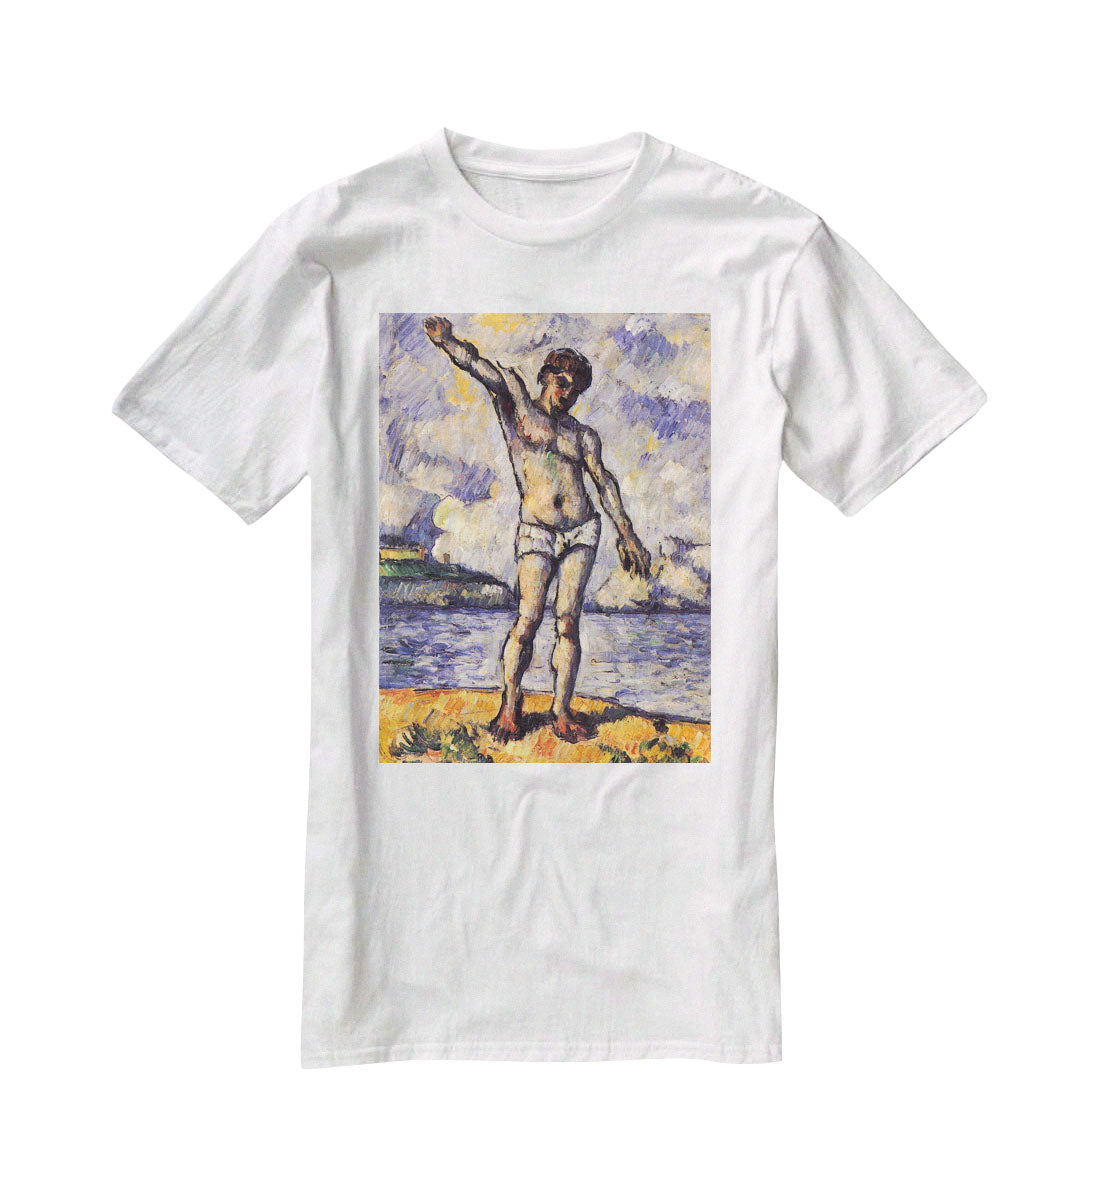 Swimmer with outstretched arms by Cezanne T-Shirt - Canvas Art Rocks - 5